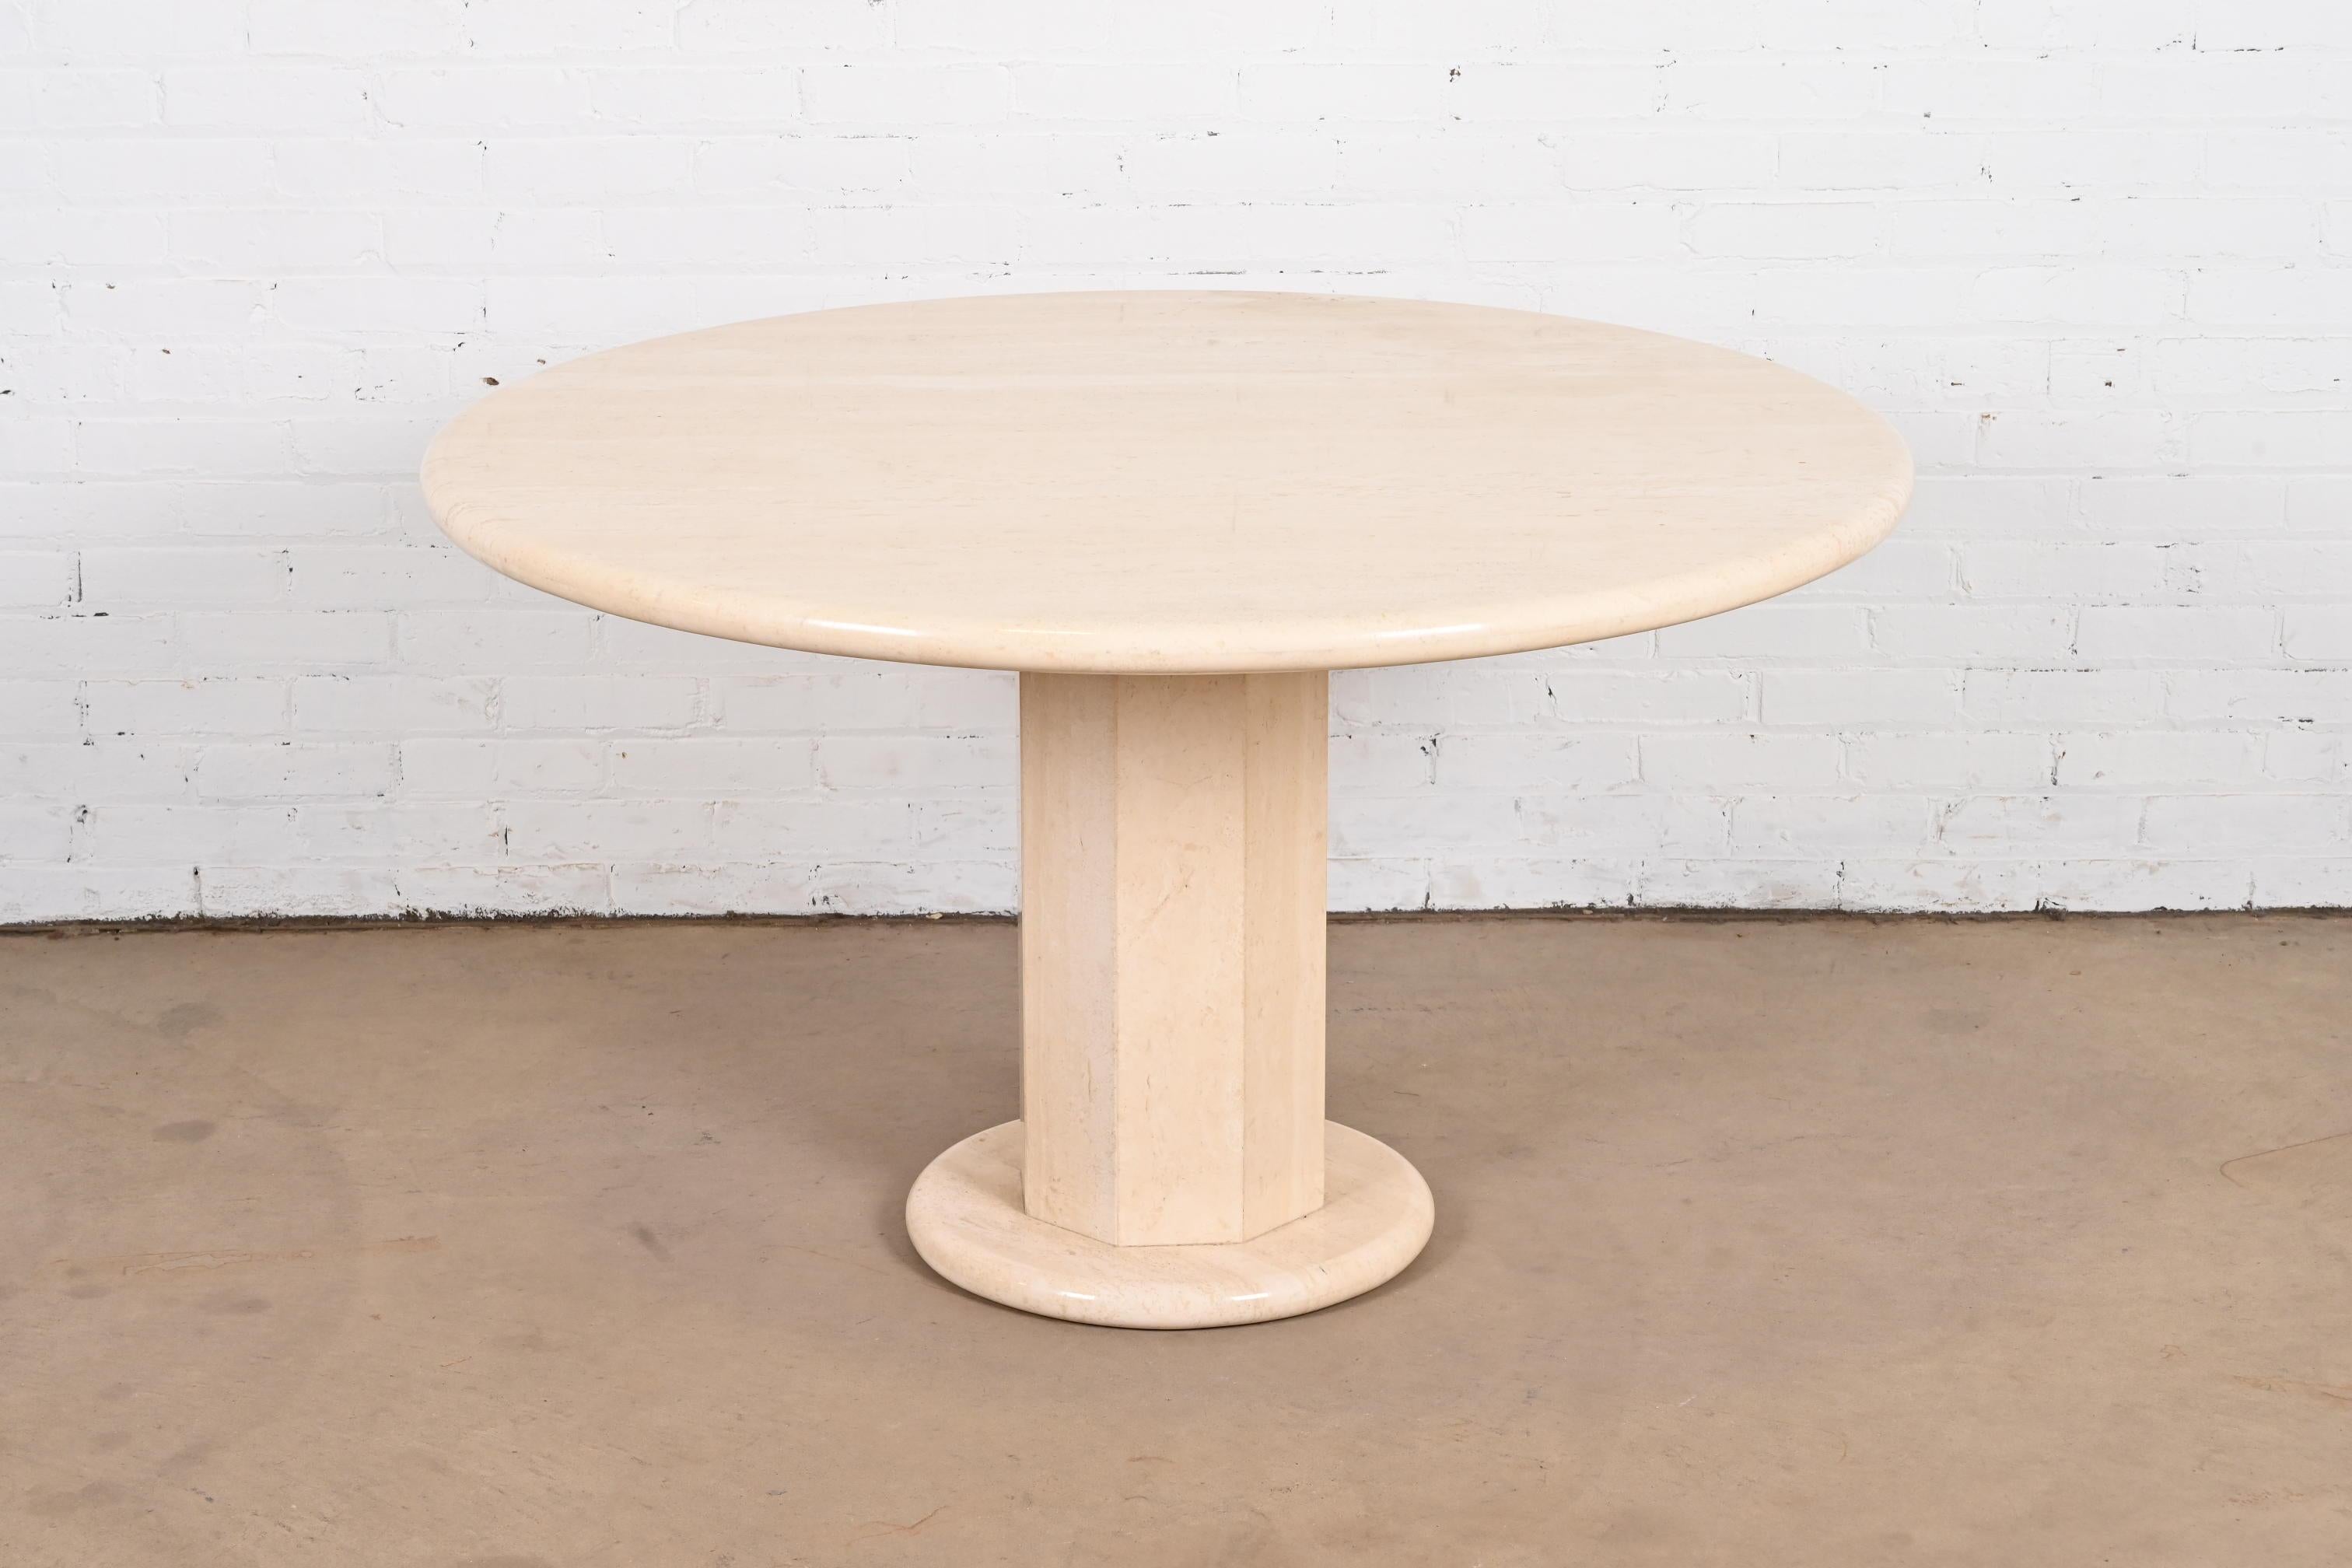 An exceptional modern Italian travertine round pedestal dining table, game table, or center table

By Ello

Italy, circa 1970s

Measures: 48